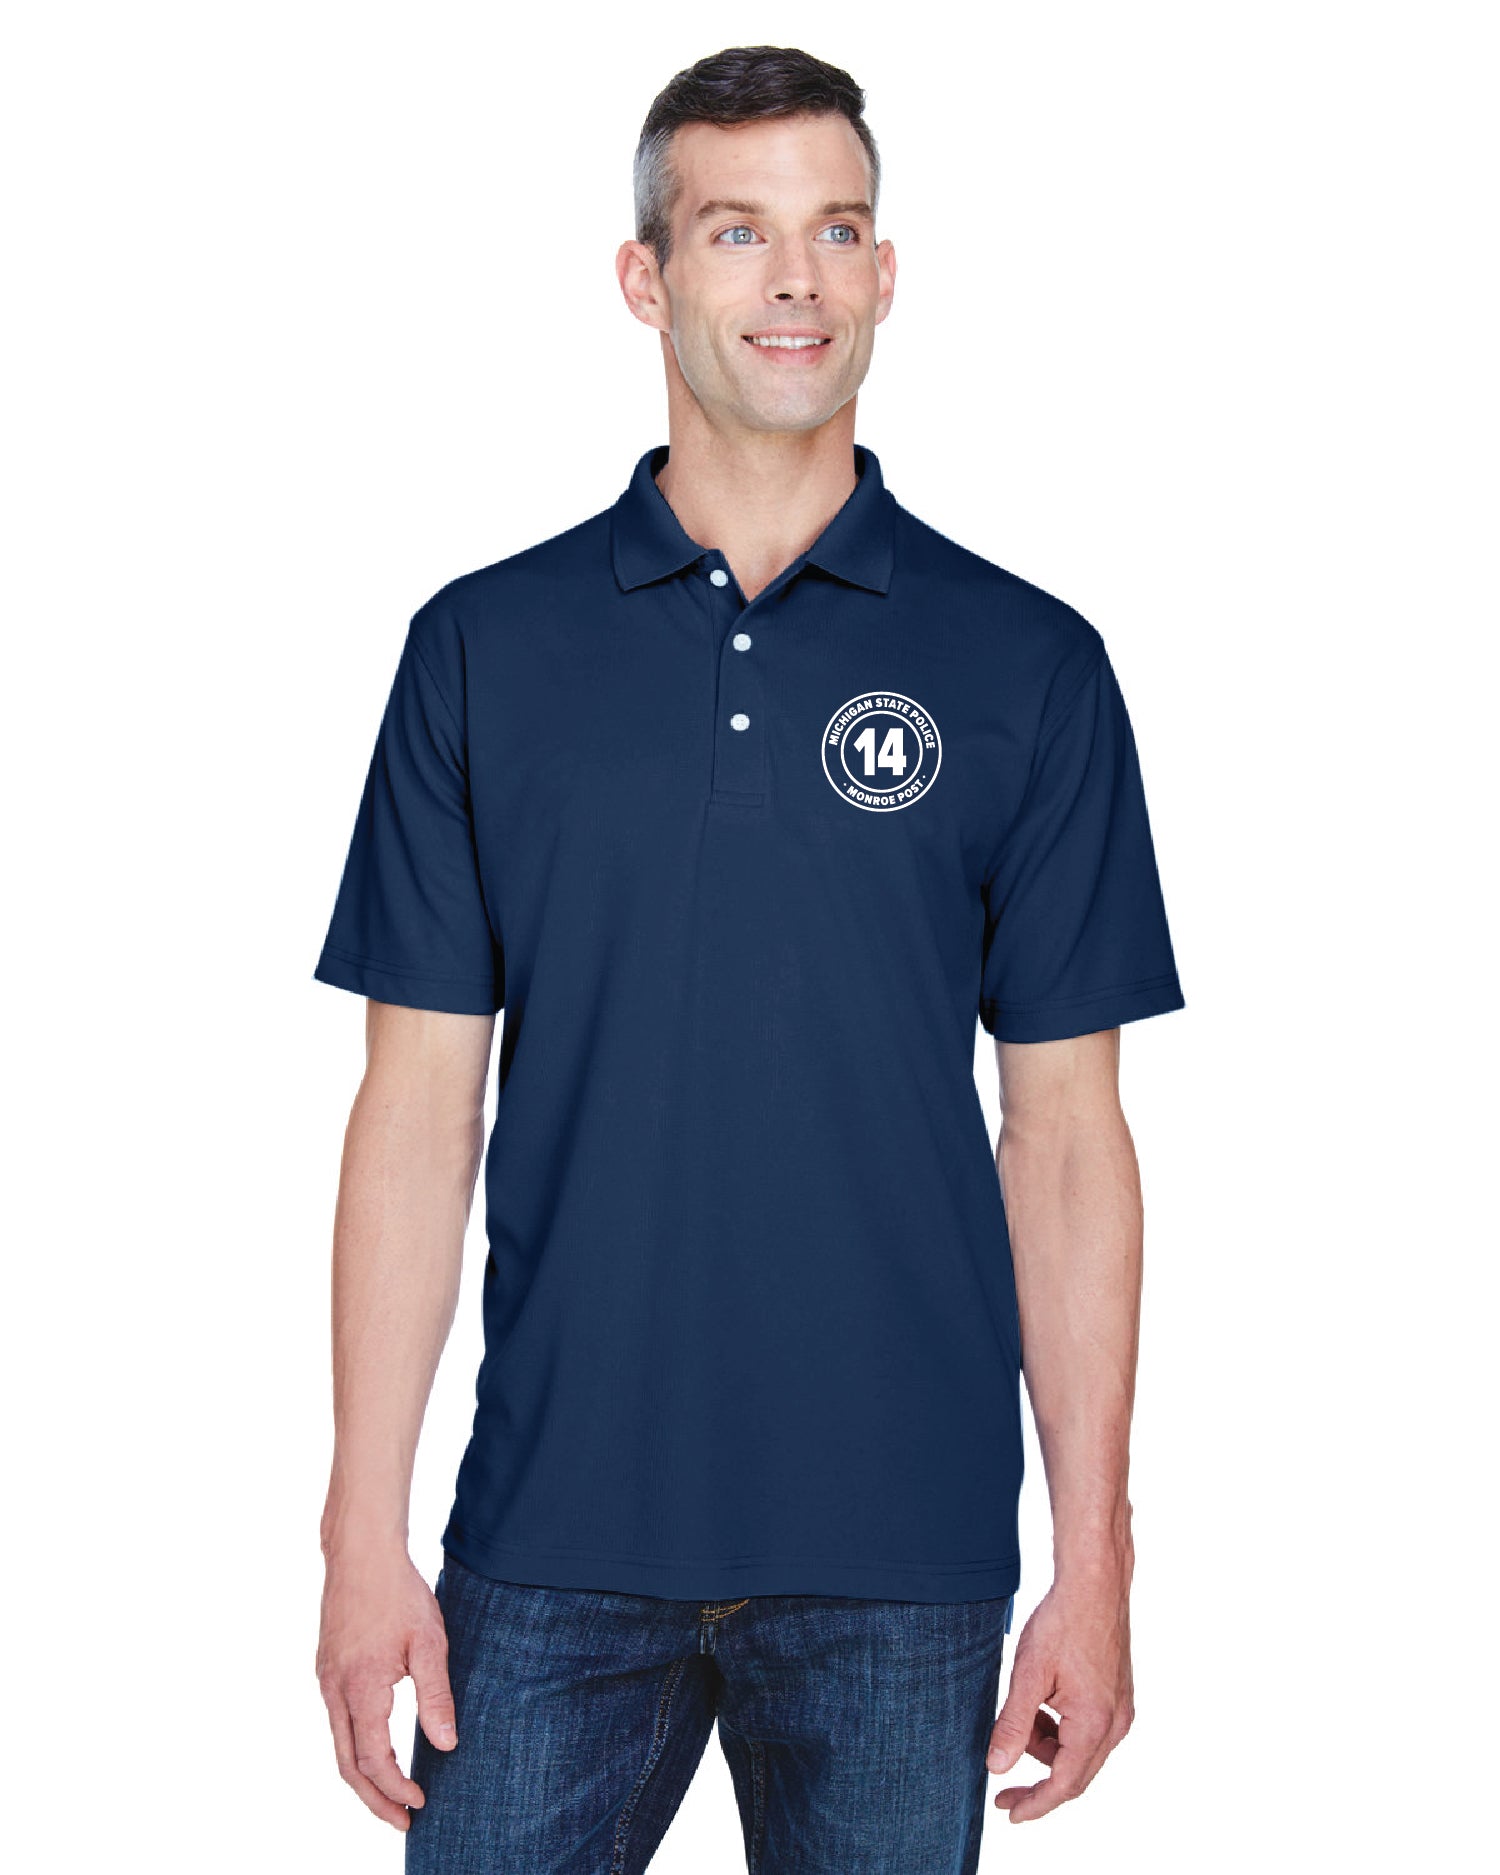 EMBROIDERED - UltraClub Men's Cool & Dry Stain-Release Performance Polo